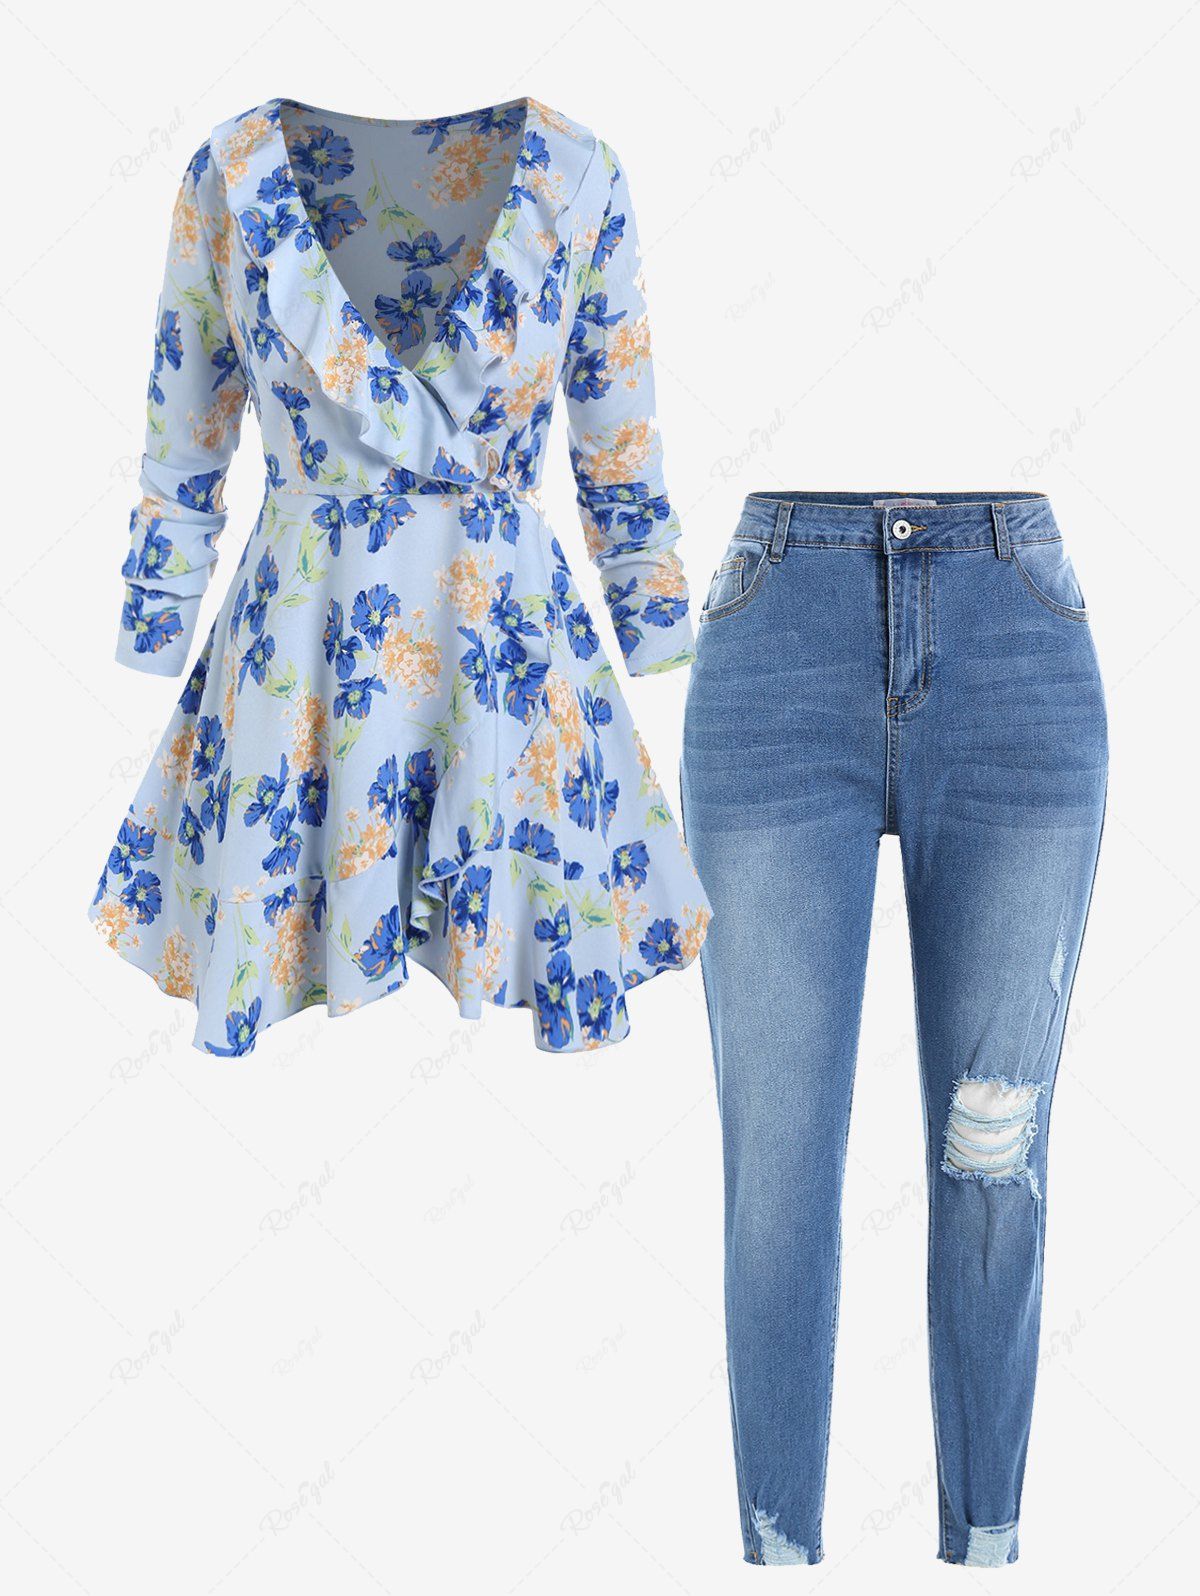 Outfits Plus Size Plunge Ruffle Floral Print Blouse and Ripped Pencil Jeans Outfit  